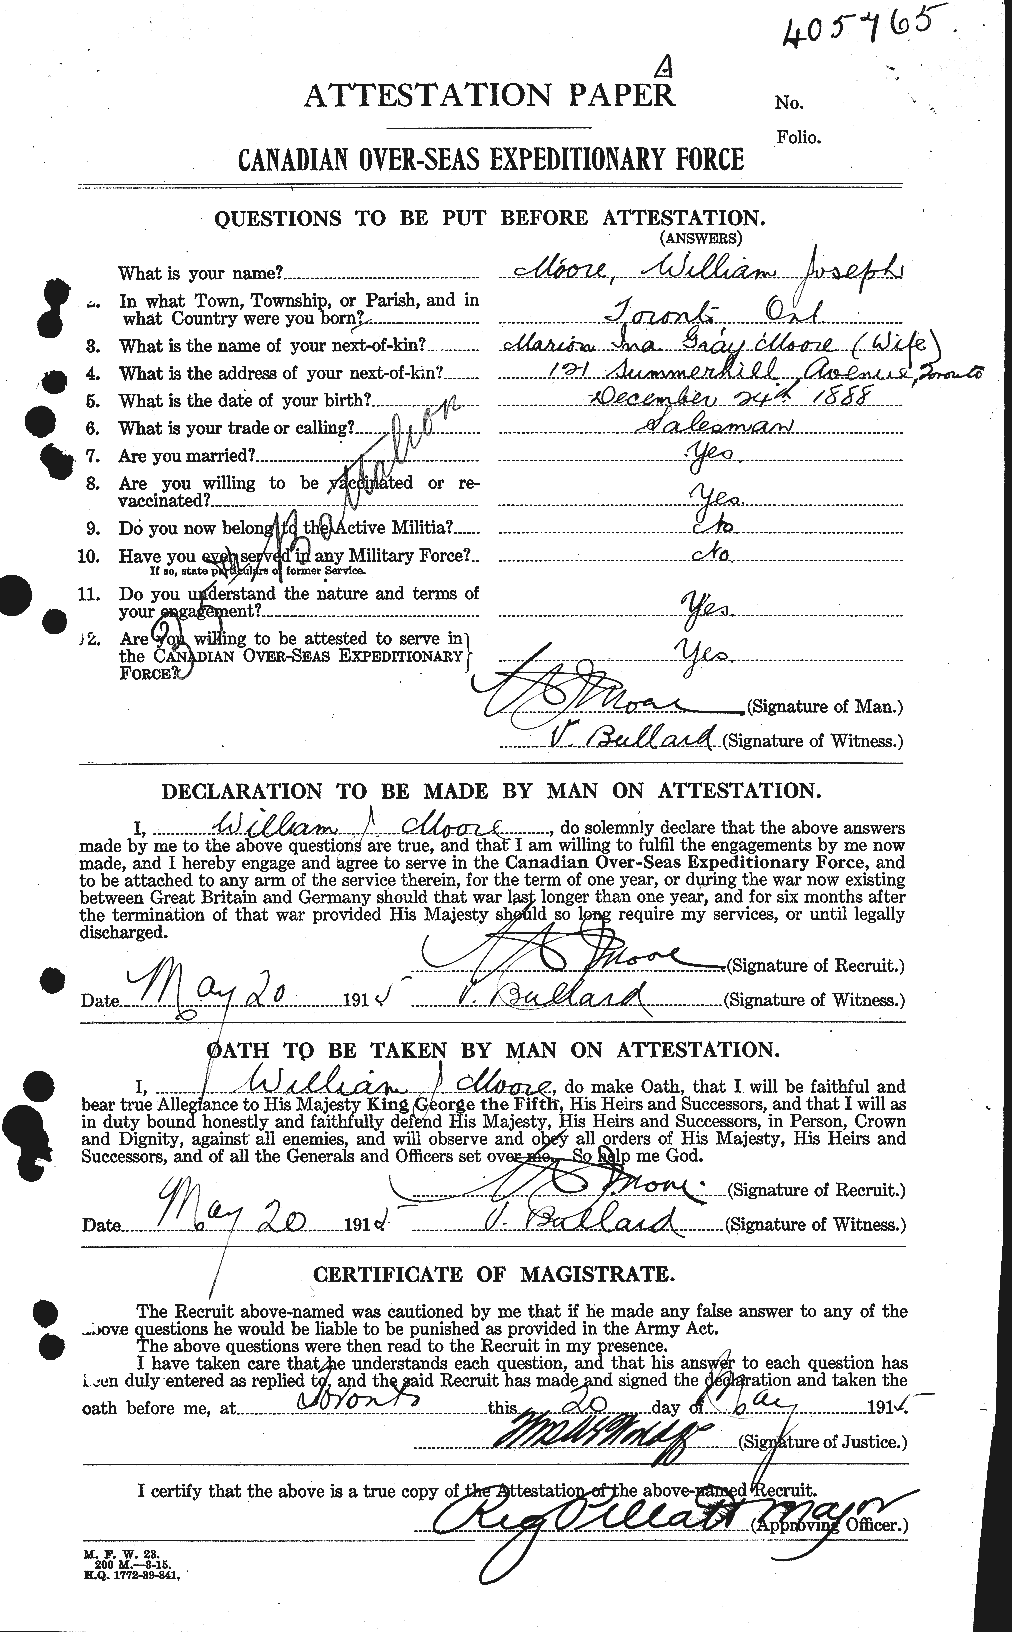 Personnel Records of the First World War - CEF 505851a